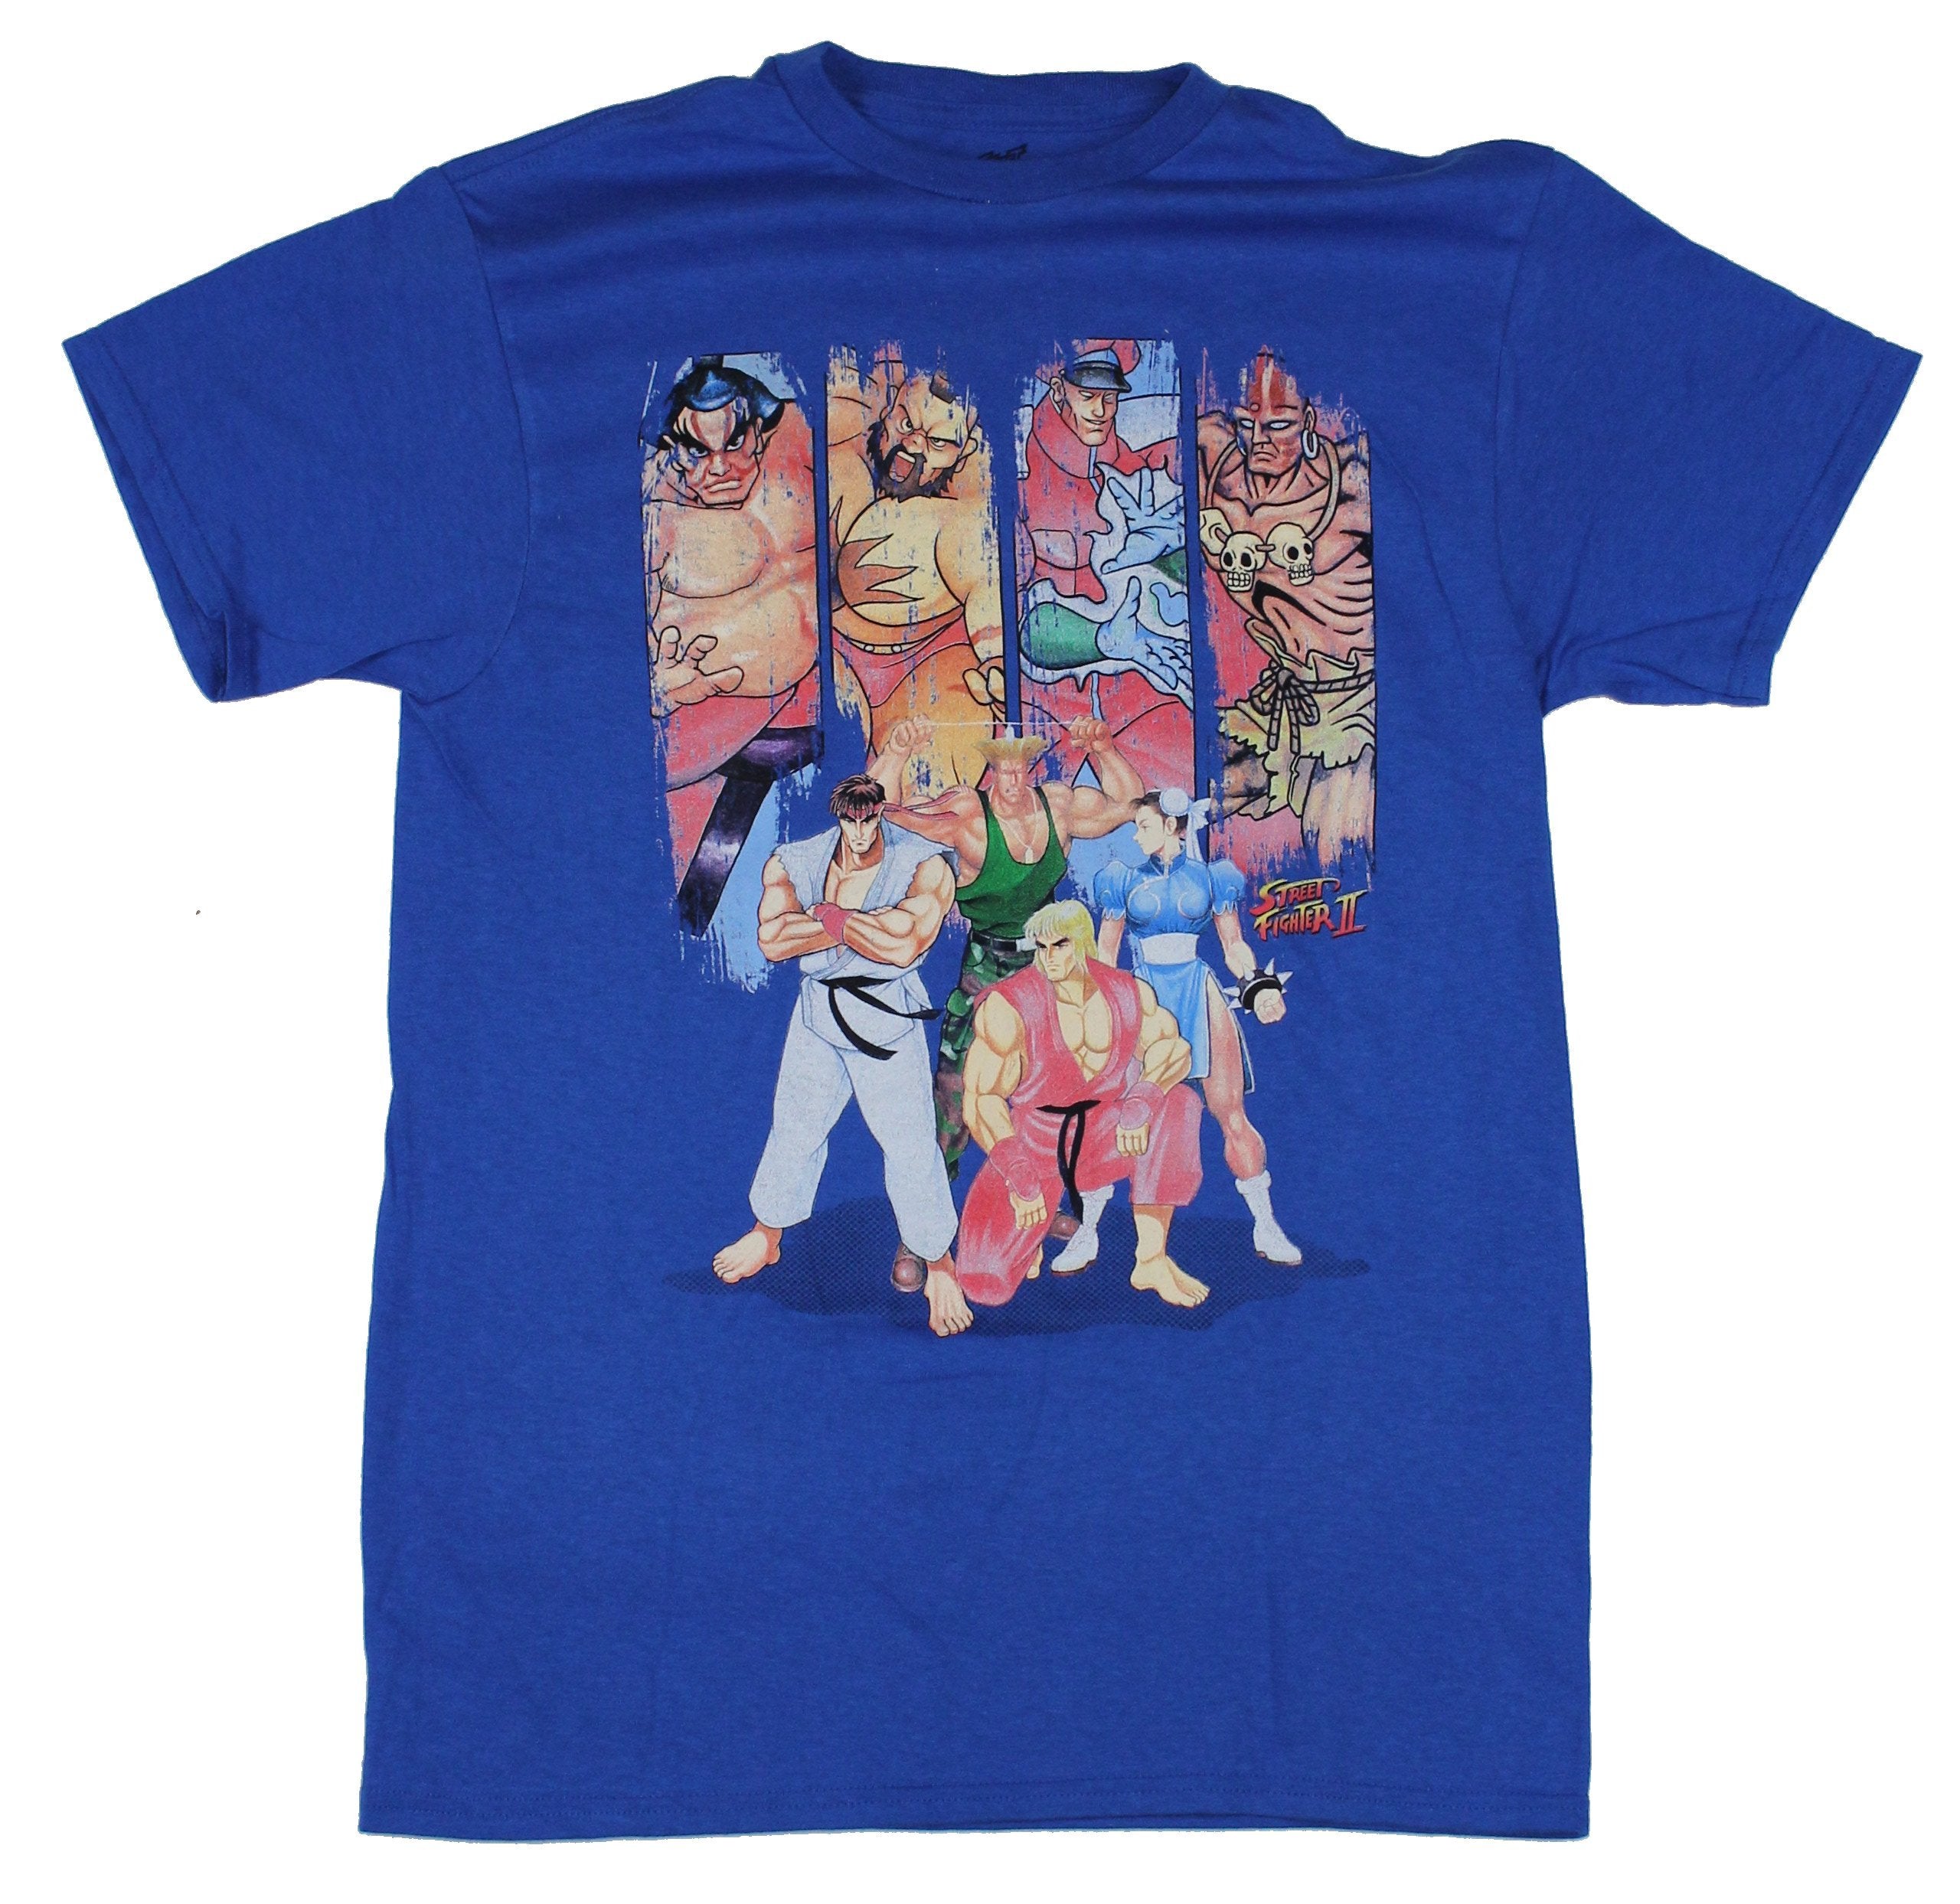 Street Fighter II Mens T-Shirt - Character Group Under Distressed Swipes